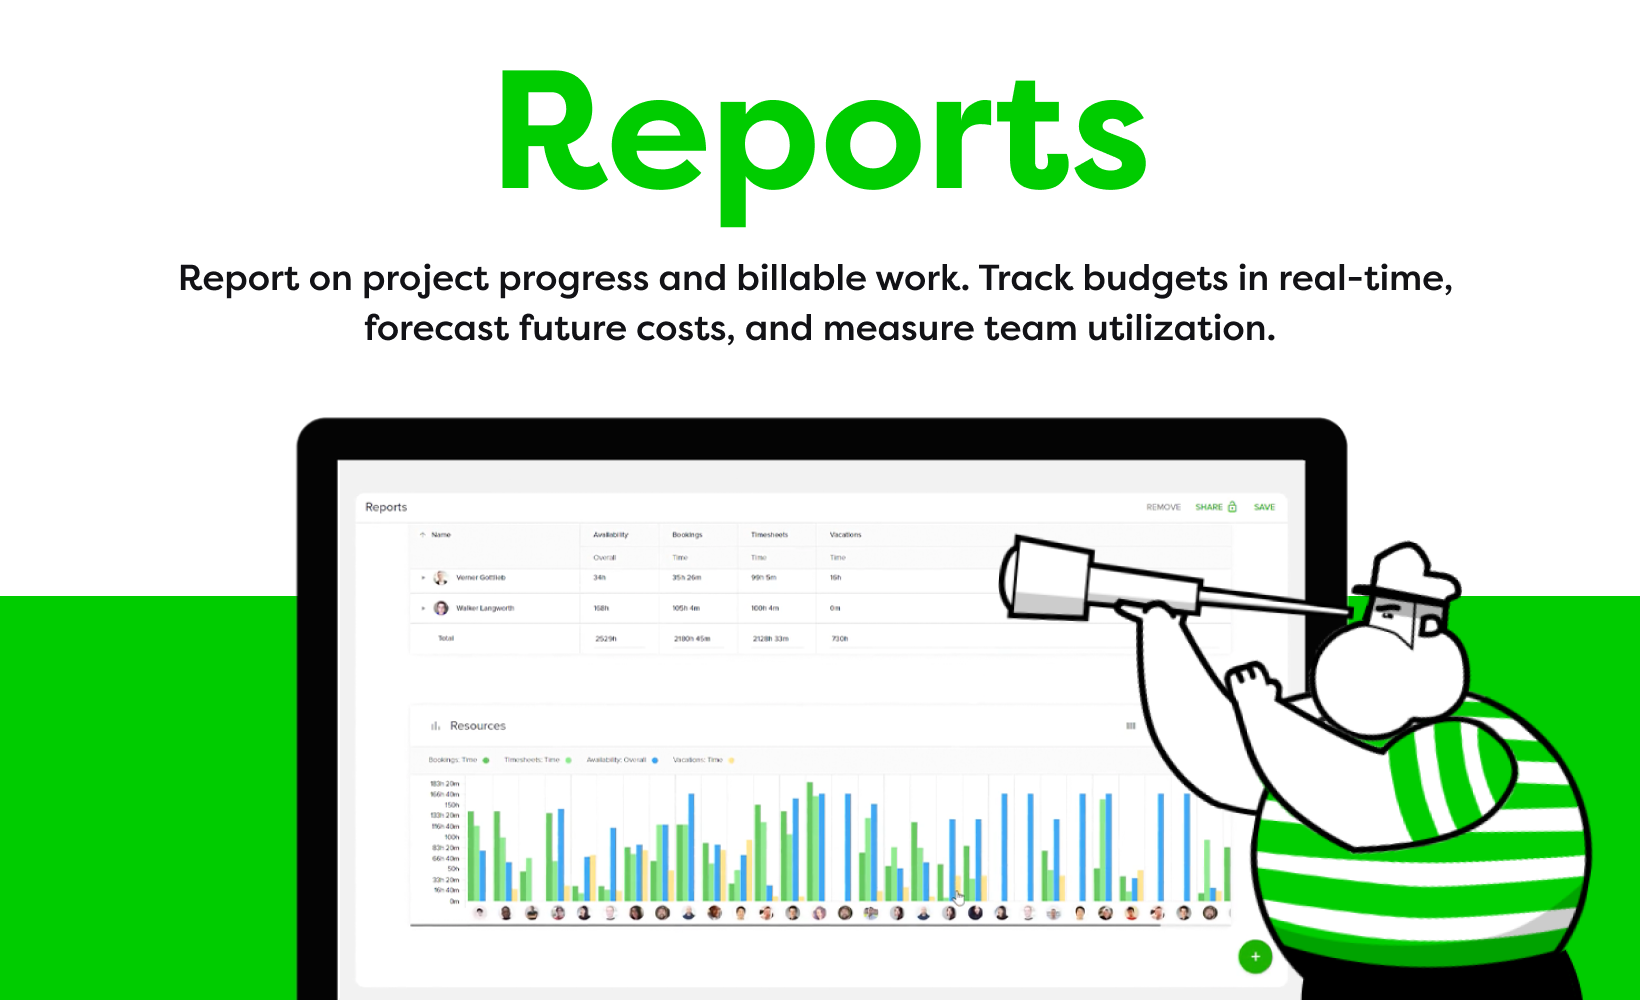 Report on project progress and billable work. Track budgets in real-time, forecast future costs, and measure team utilization.